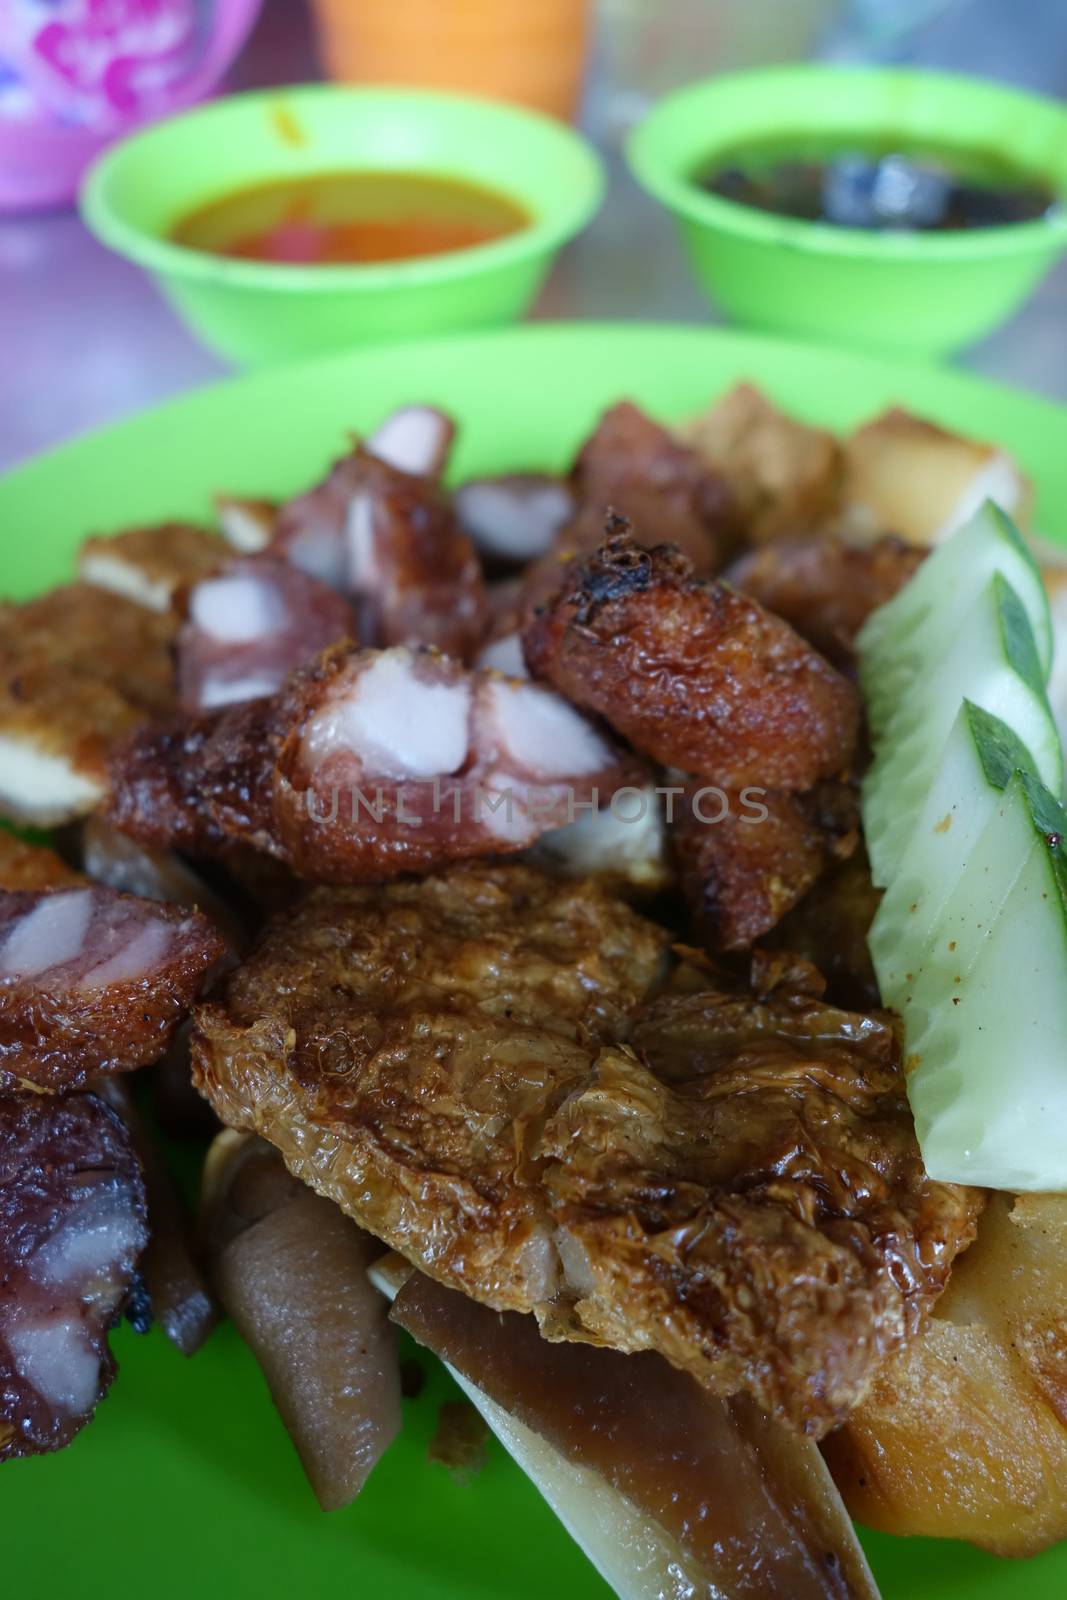 Chinese fivespice pork rolls are a very popular Penang hawker dish